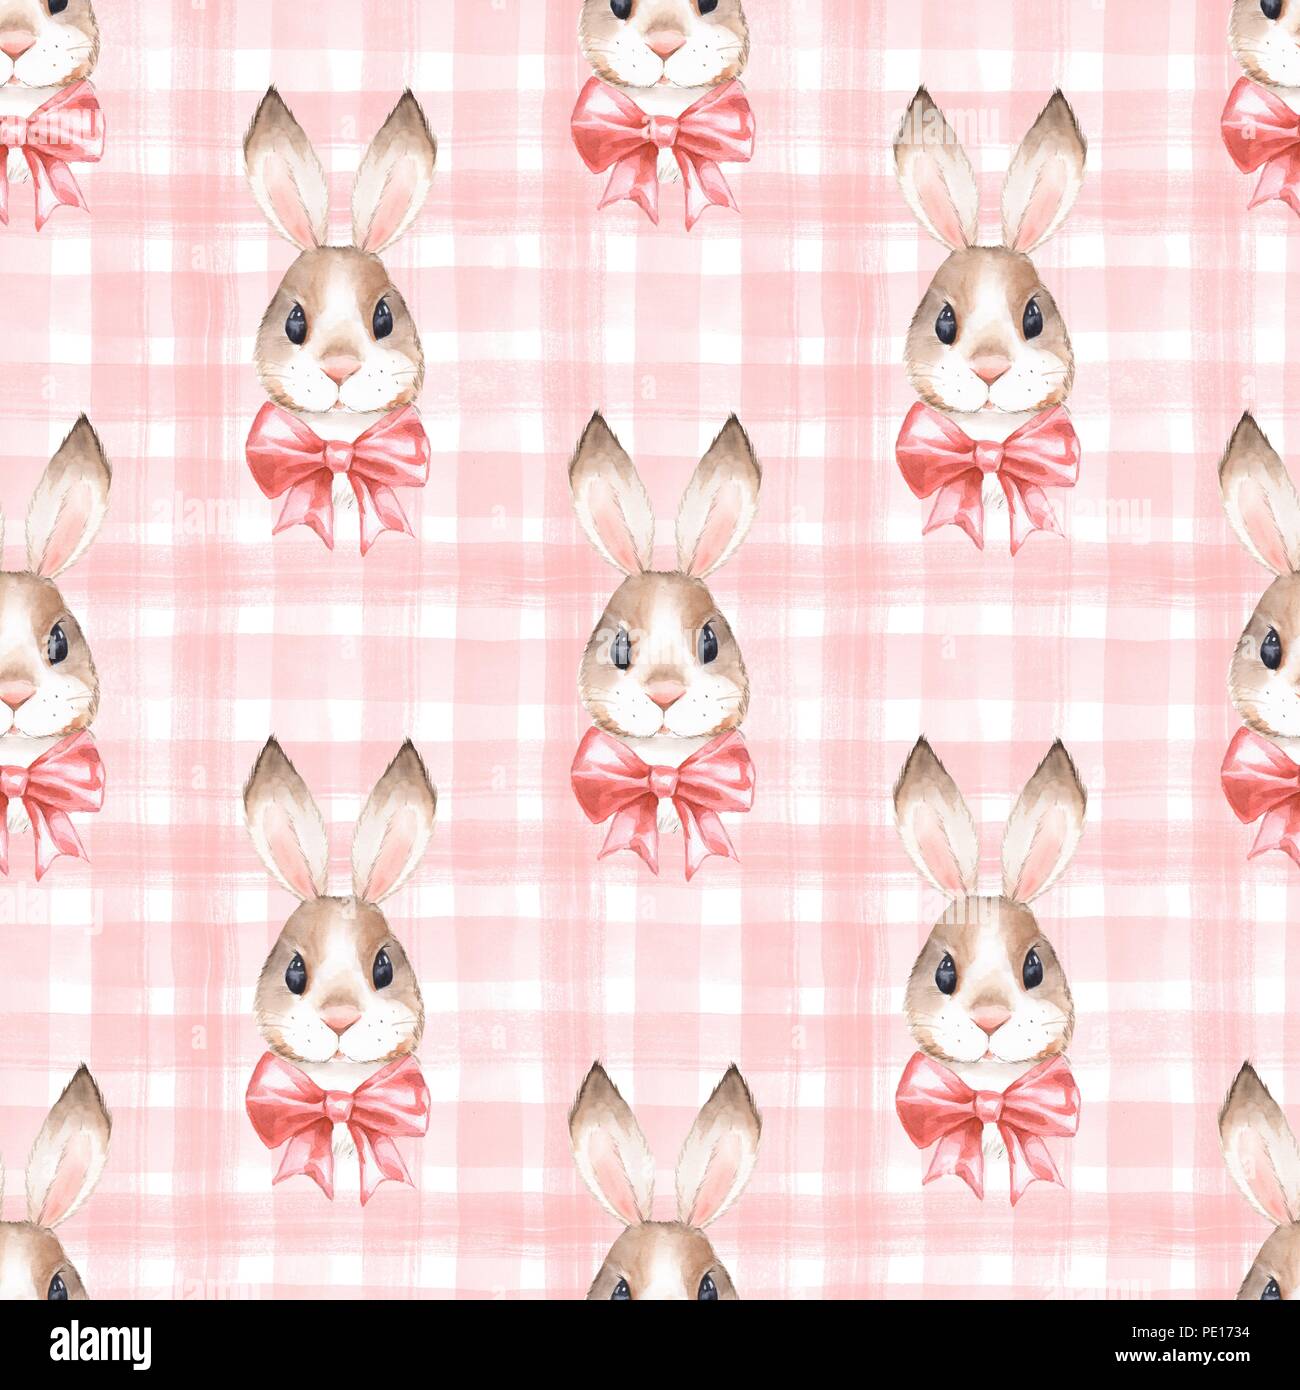 Seamless pattern with cute rabbits. Watercolor illustration Stock Photo